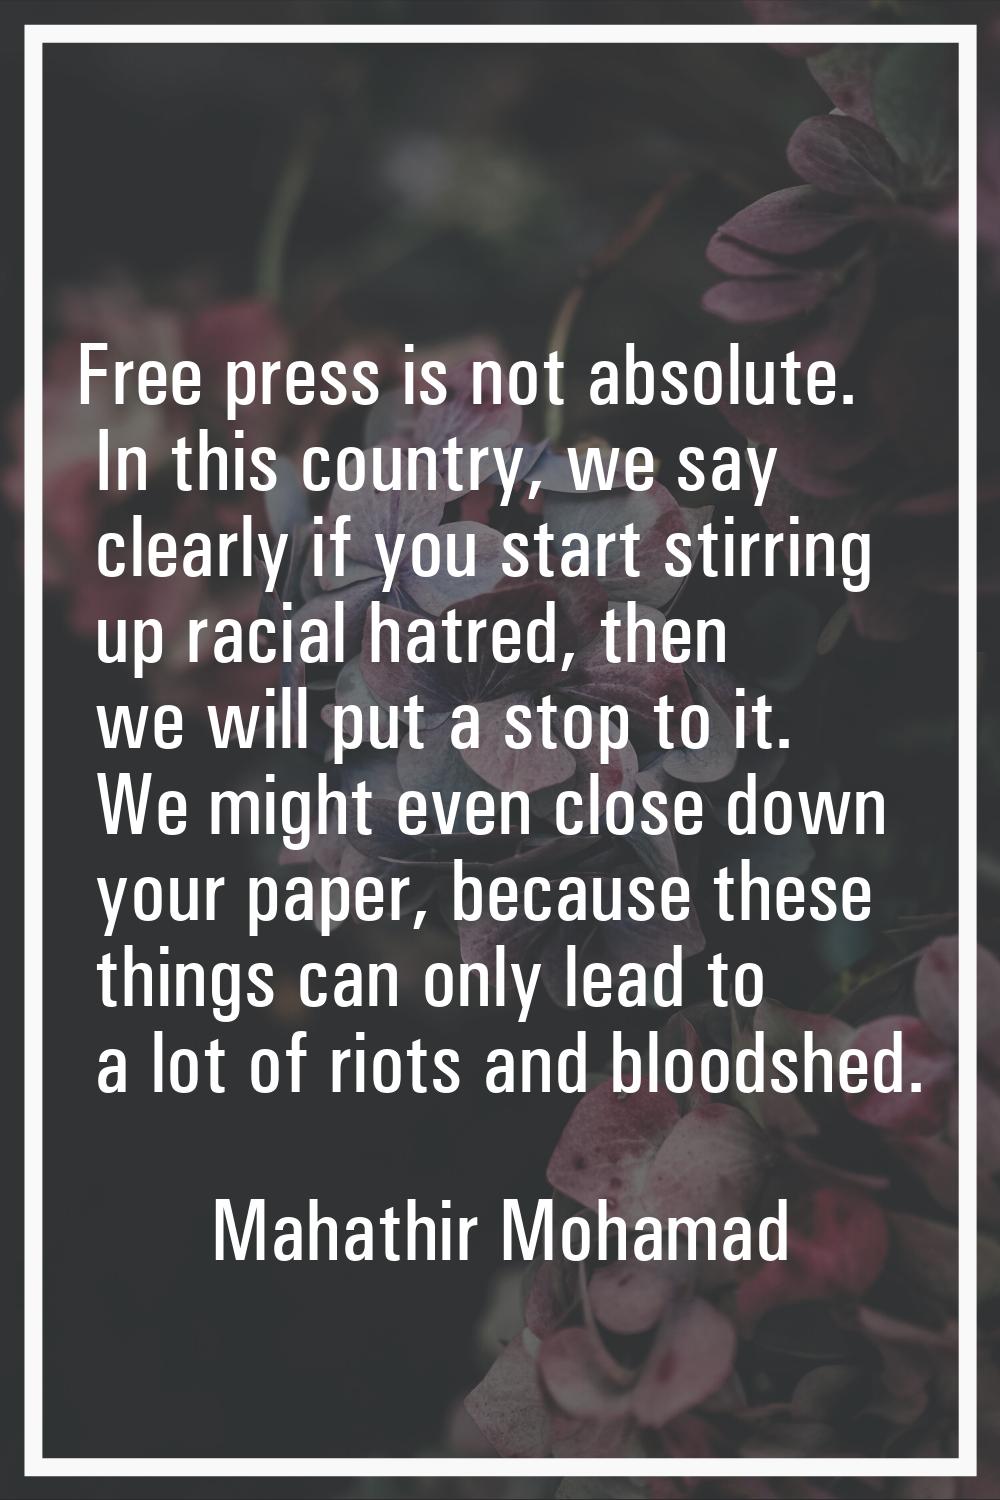 Free press is not absolute. In this country, we say clearly if you start stirring up racial hatred,